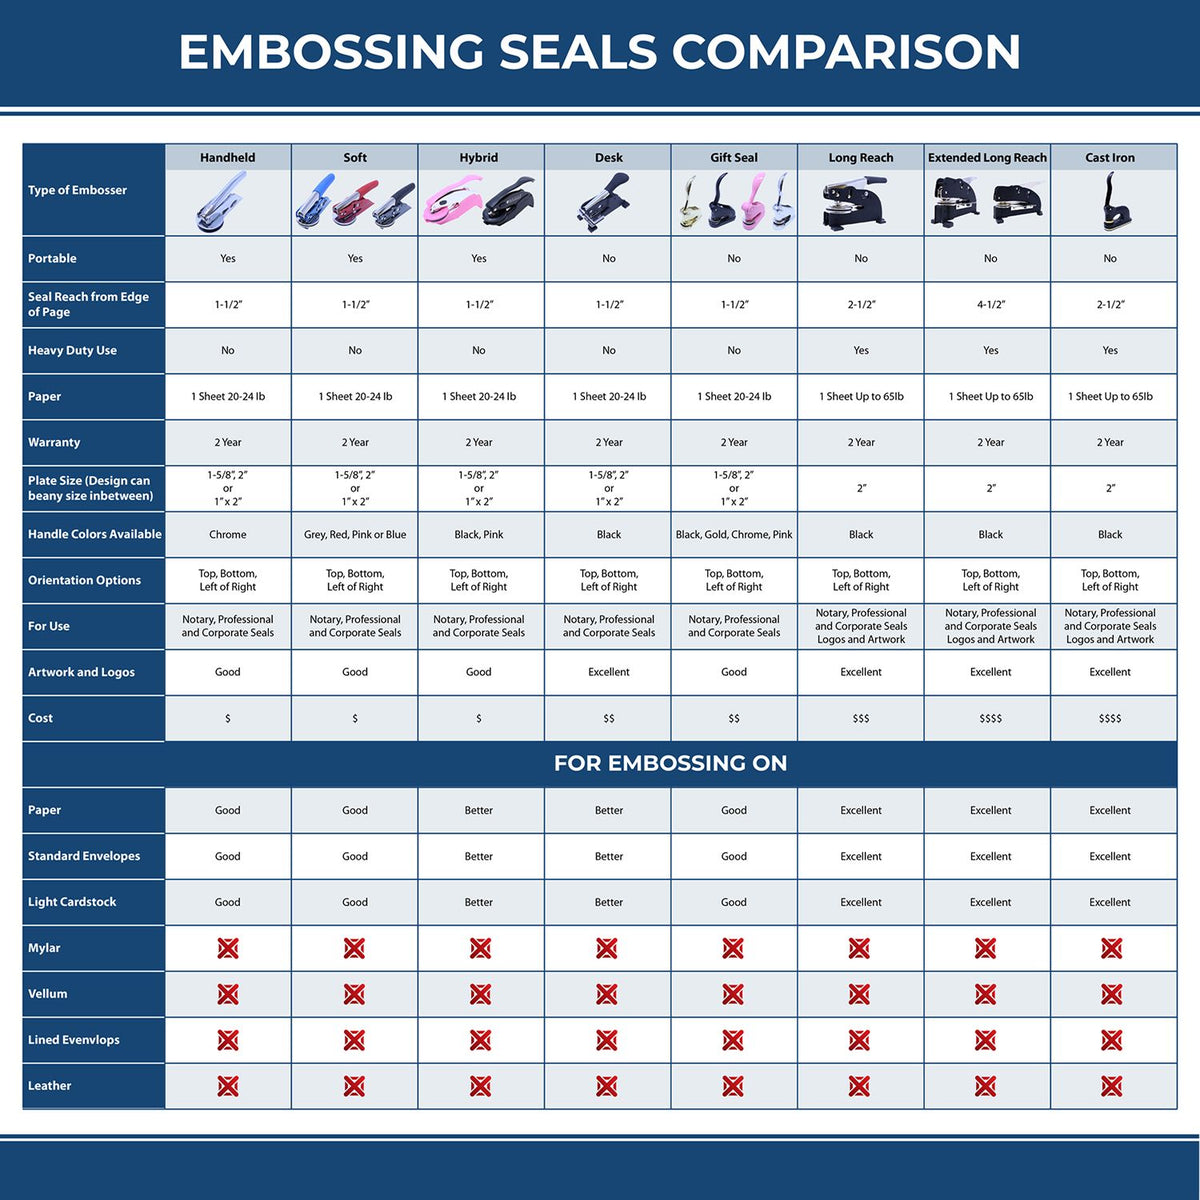 A comparison chart for the different types of mount models available for the Hybrid Nevada Land Surveyor Seal